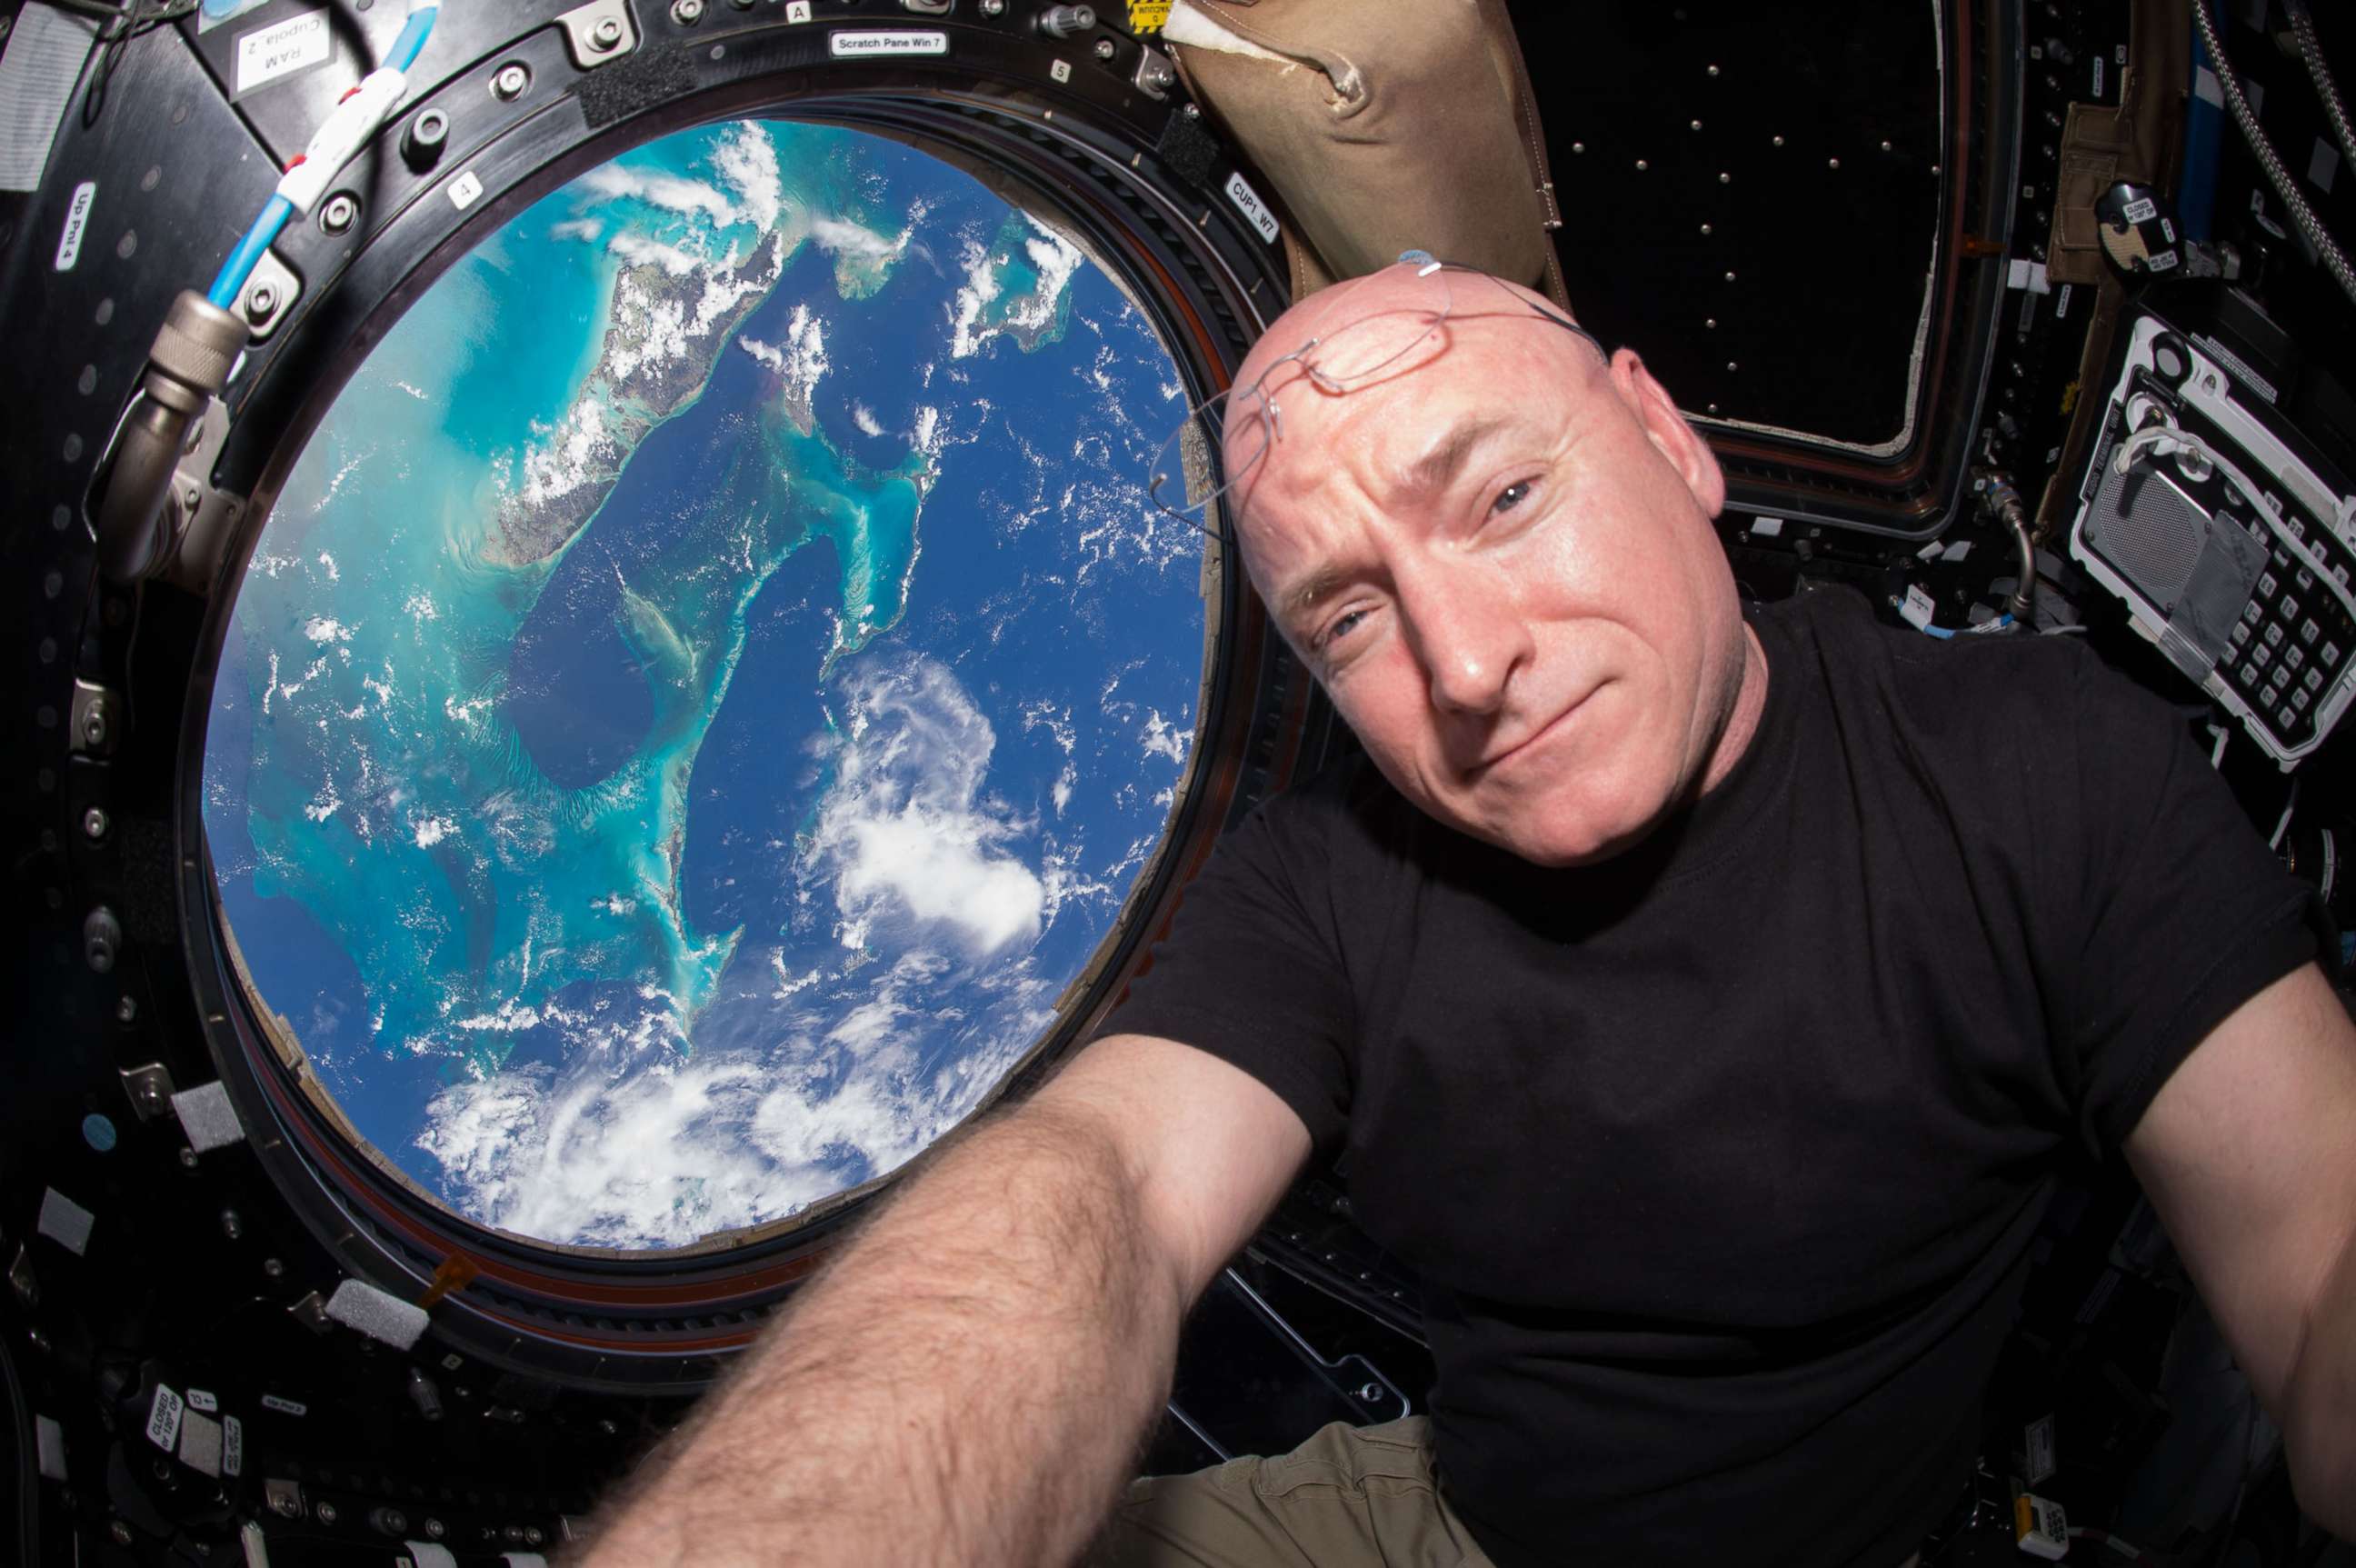 PHOTO: Expedition 44 flight engineer and NASA astronaut Scott Kelly seen inside the Cupola, a special module which provides a 360-degree viewing of the Earth and the International Space Station, July 2015.